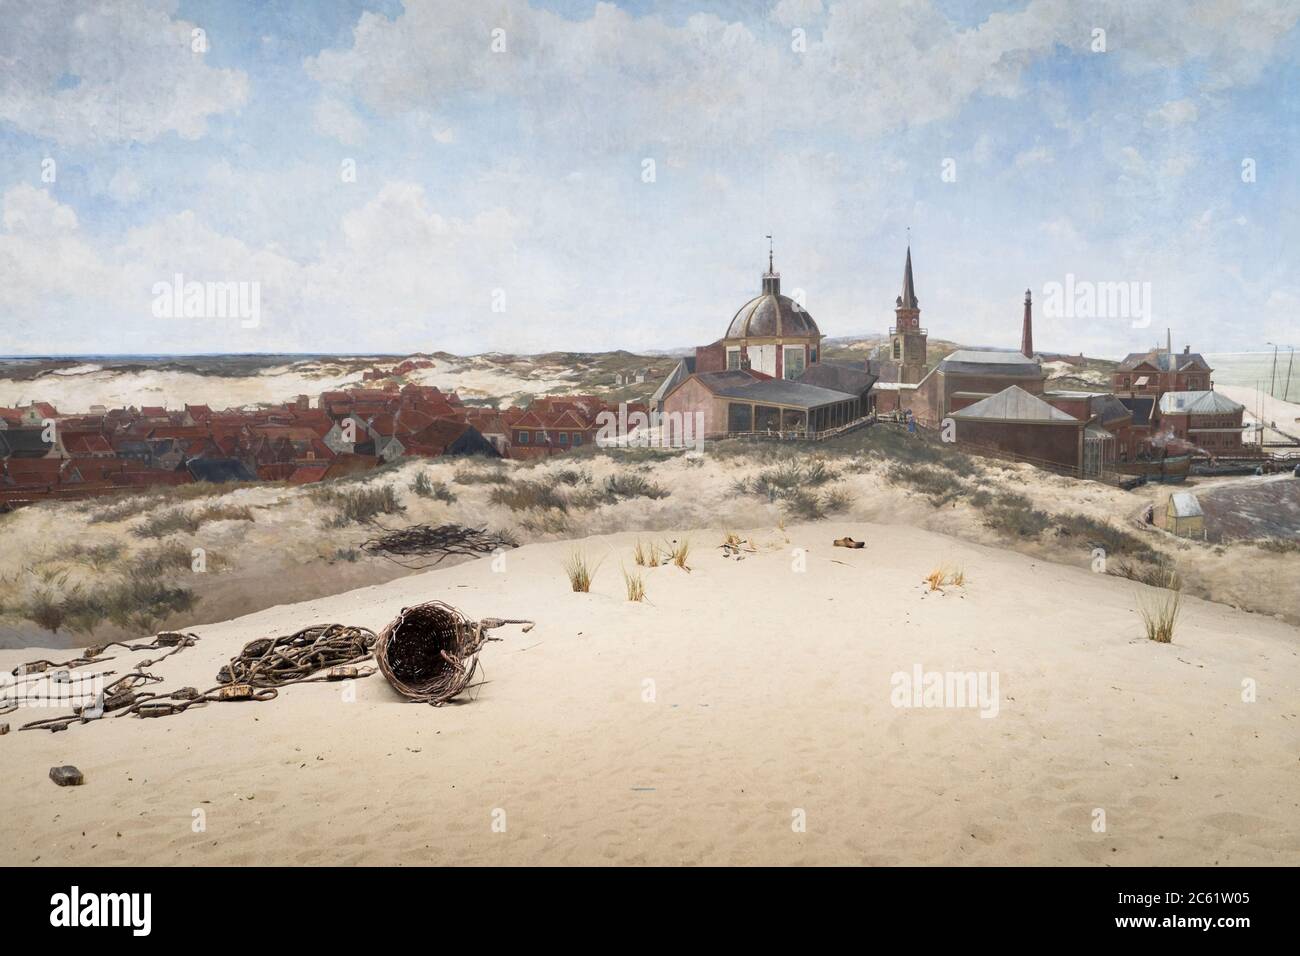 A small section of the giant cylindrical painting by the painter Mesdag, with fake terrain in the foreground in the famous Museum Mesdag in the Hague Stock Photo